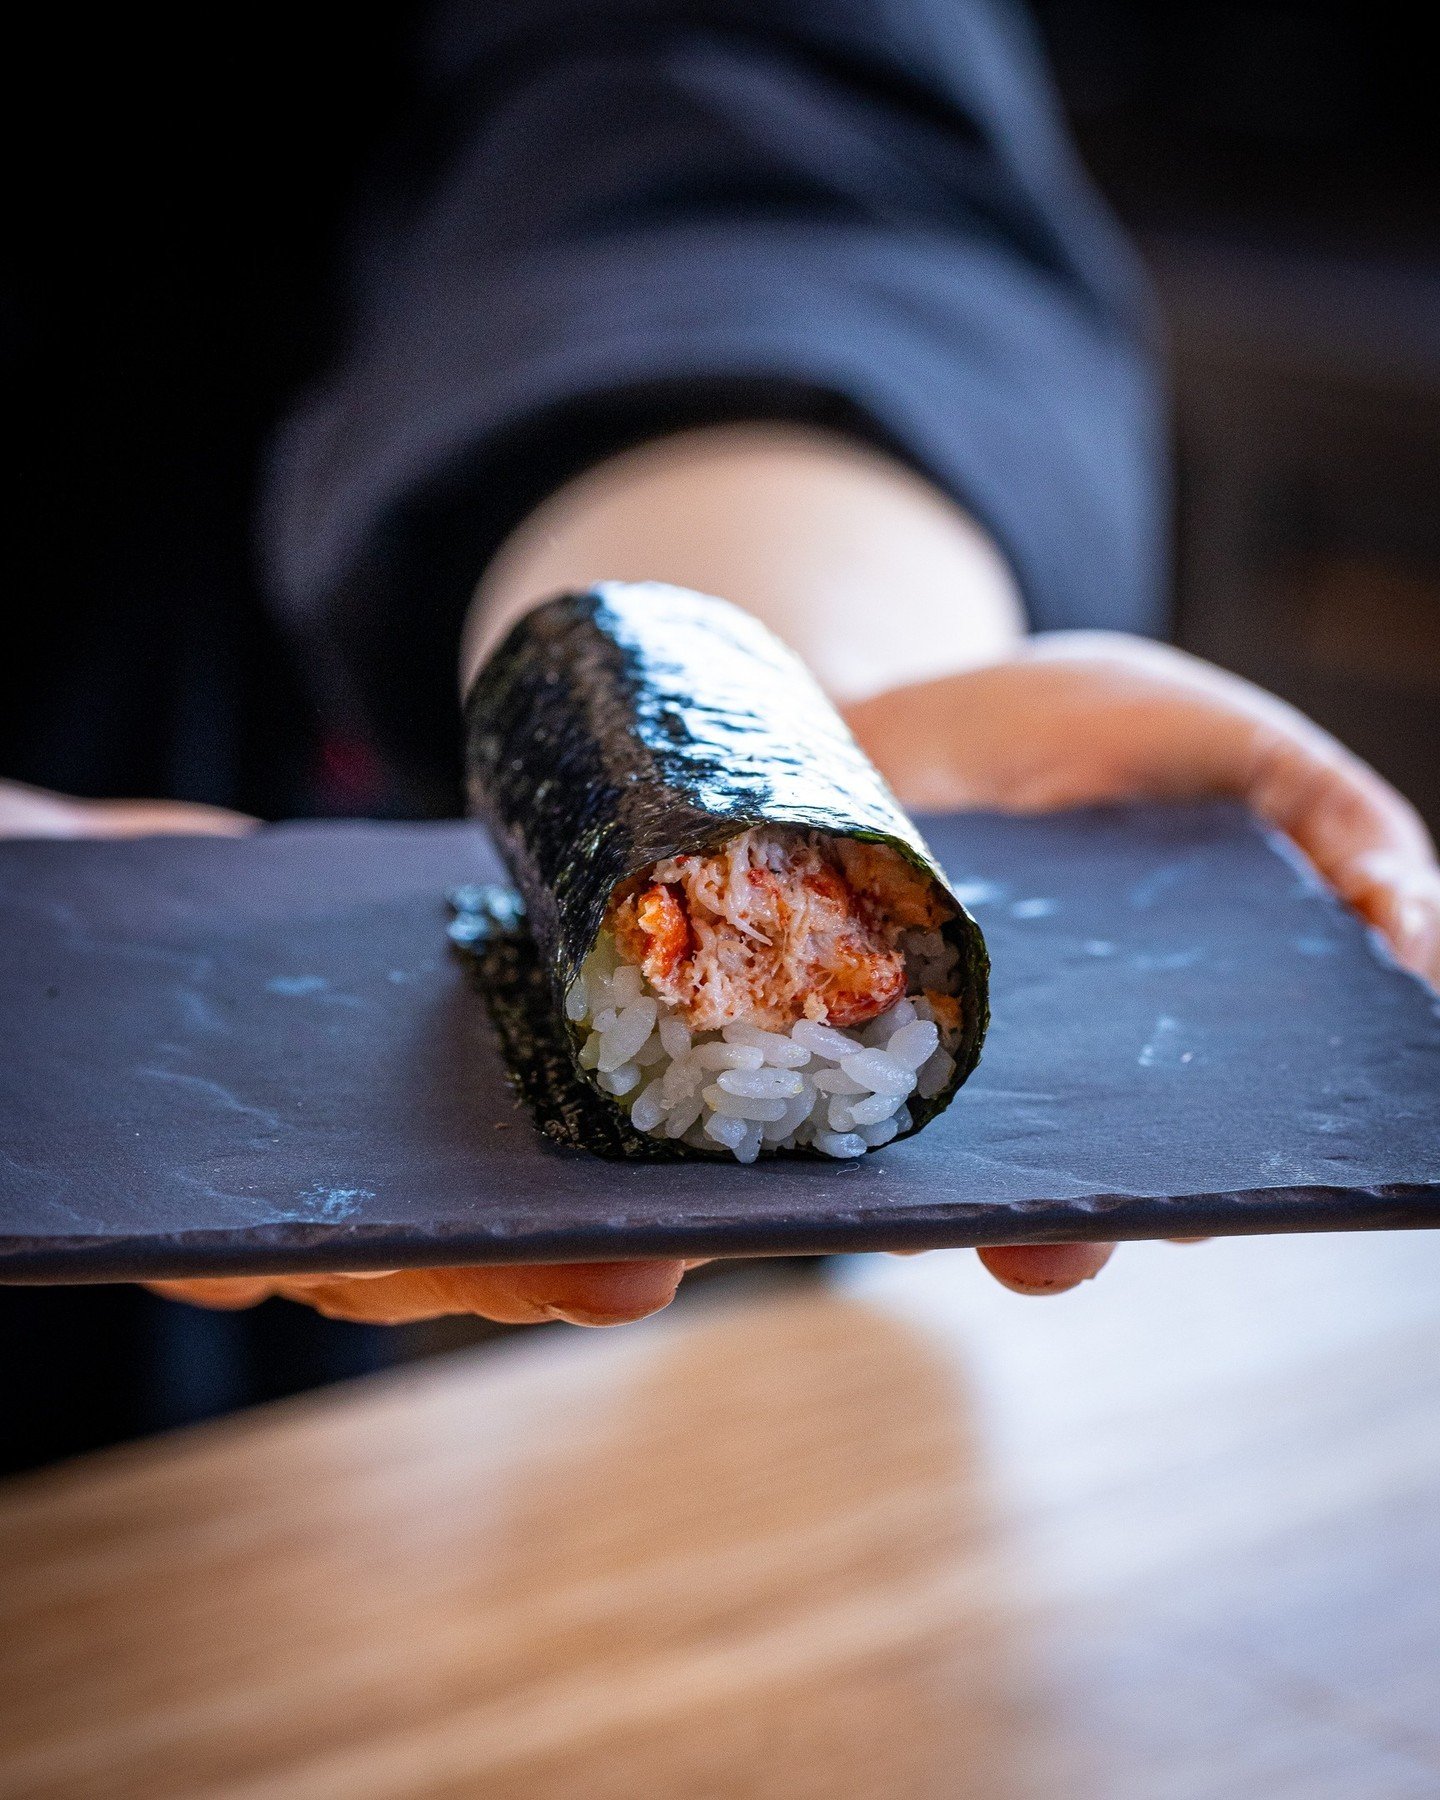 While each roll may be crafted with simple ingredients, we pay close attention to the quality of our choices. Each and every hand roll @hellonori is crafted with our very own Hello Nori Original Rice - a custom blend of hand-selected, artisanal rinse